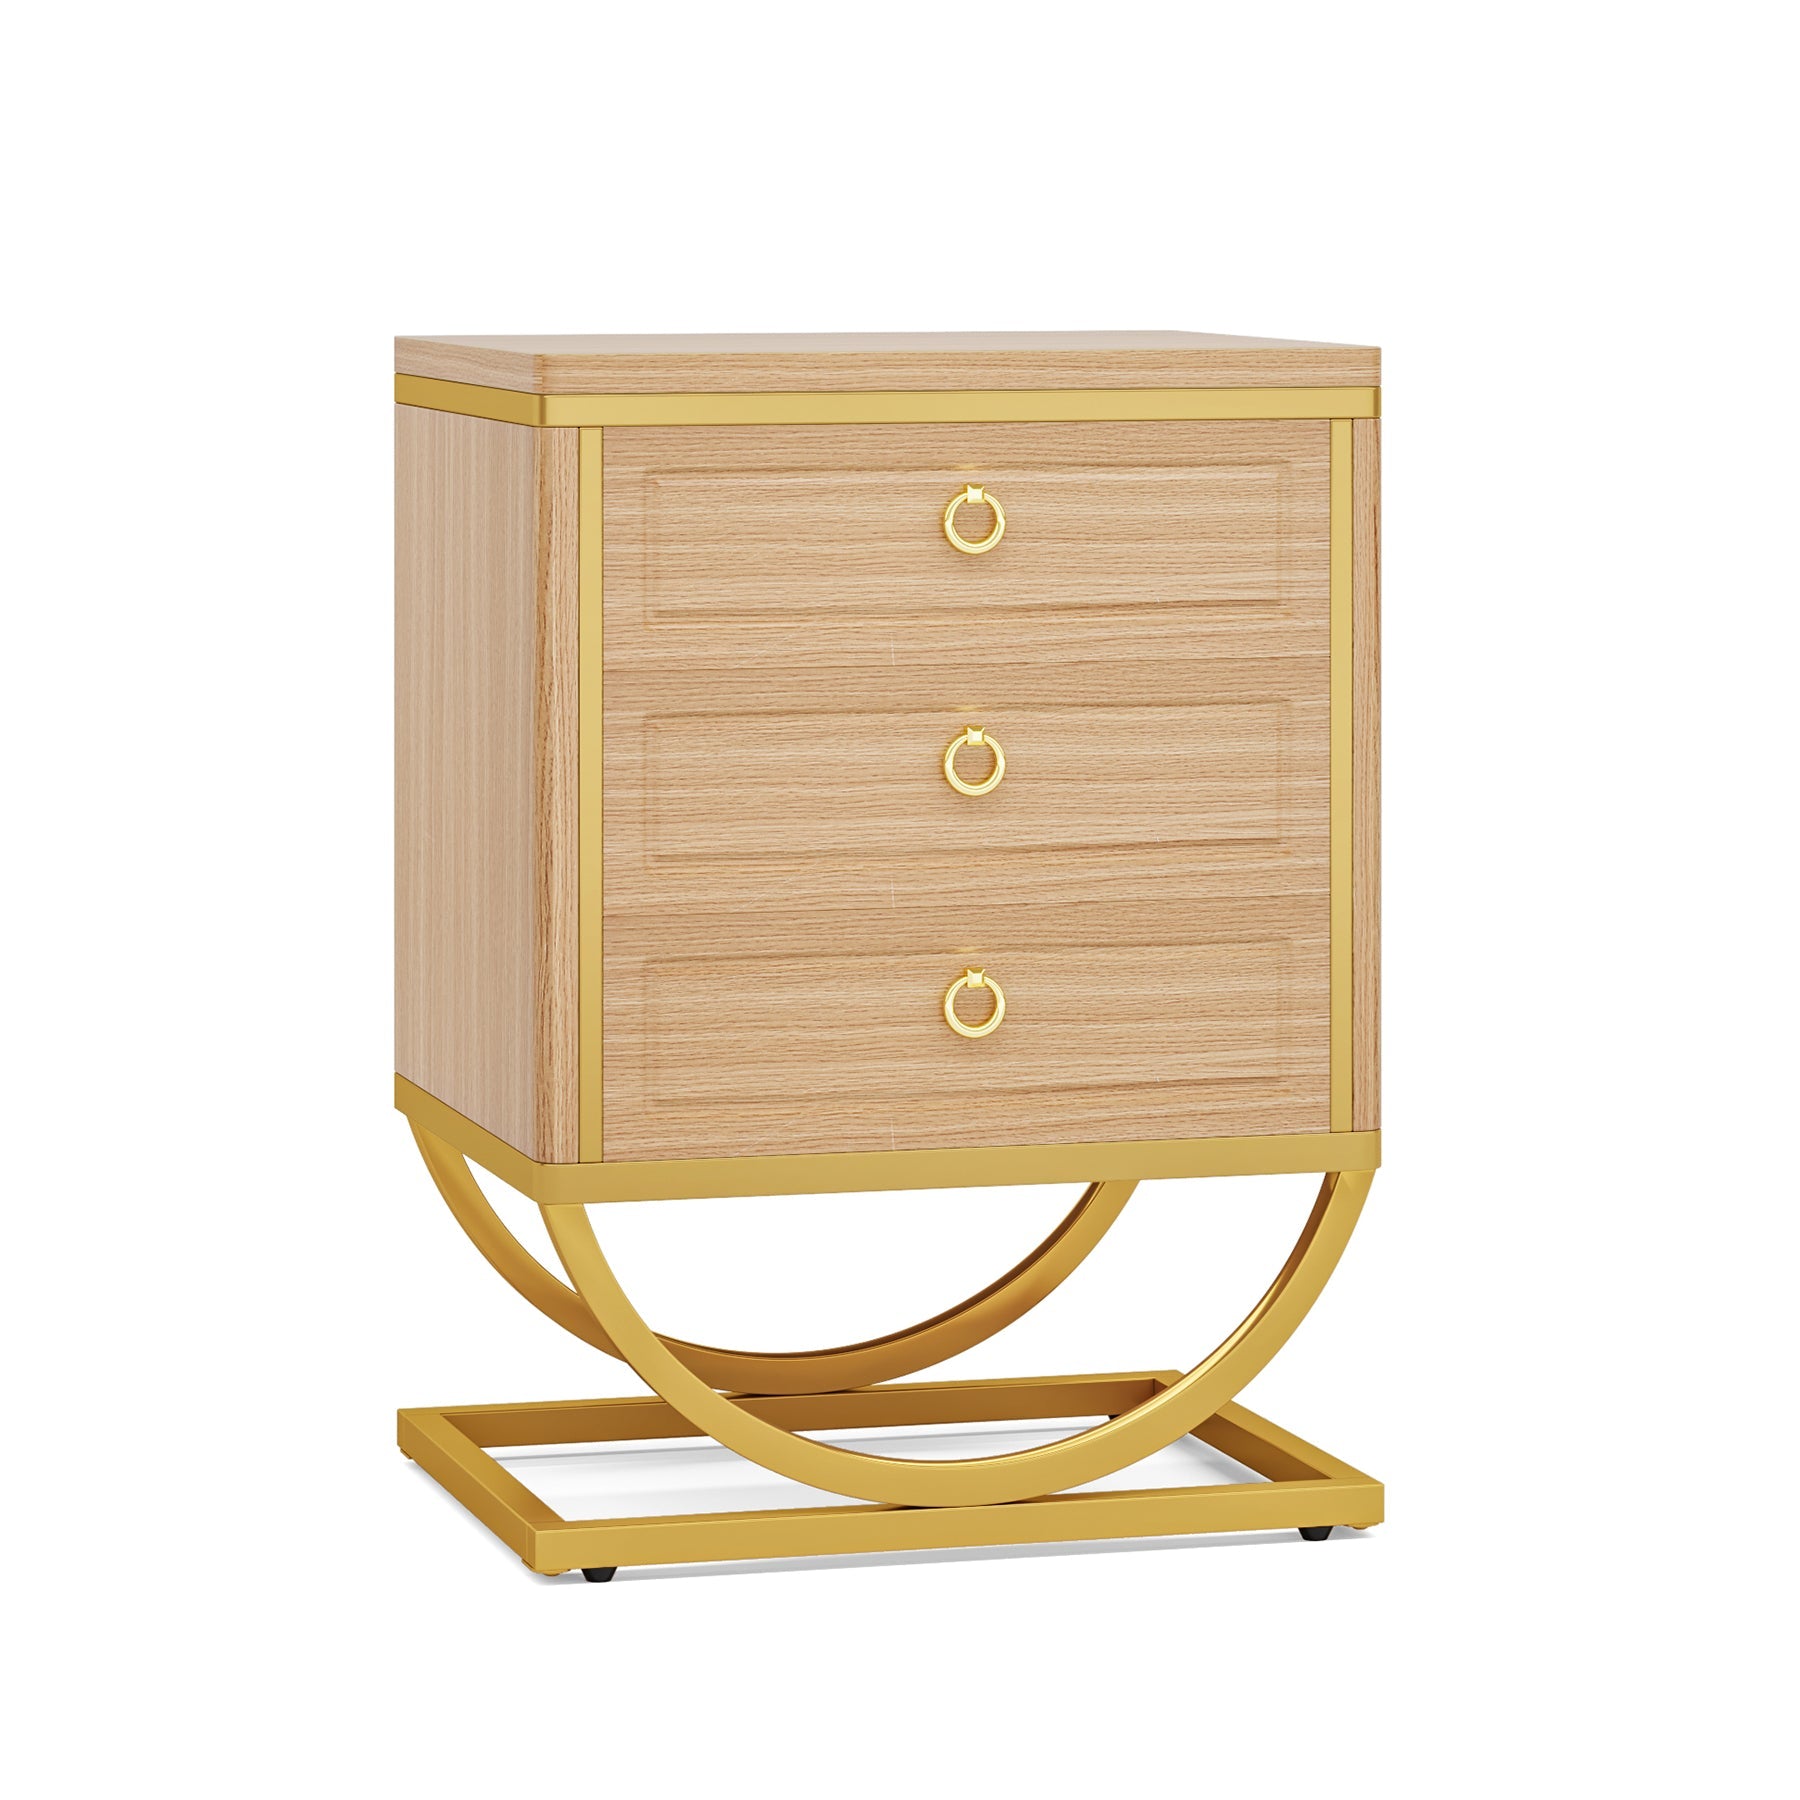 3 Drawers Nightstand, Modern Wood Bedside Table with Metal Frame